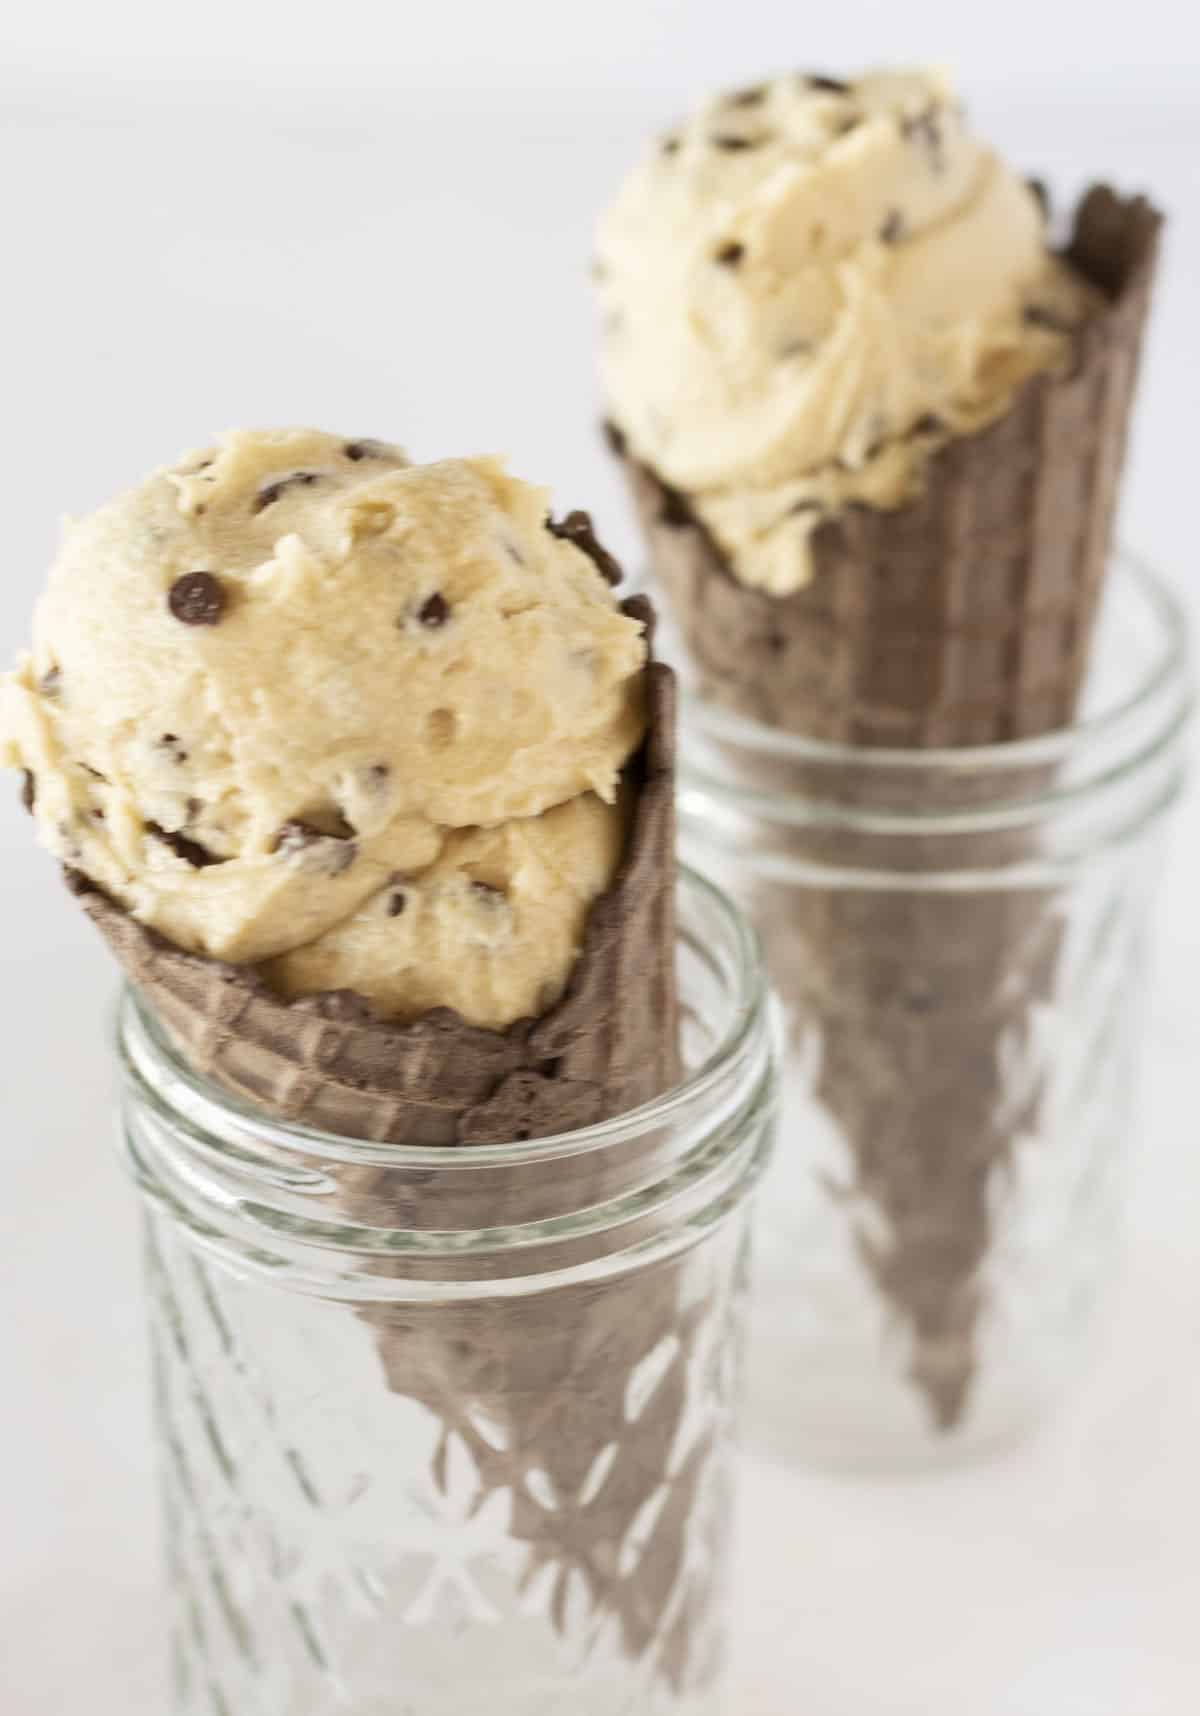 Two chocolate ice cream cones filled with scoops of edible cookie dough.